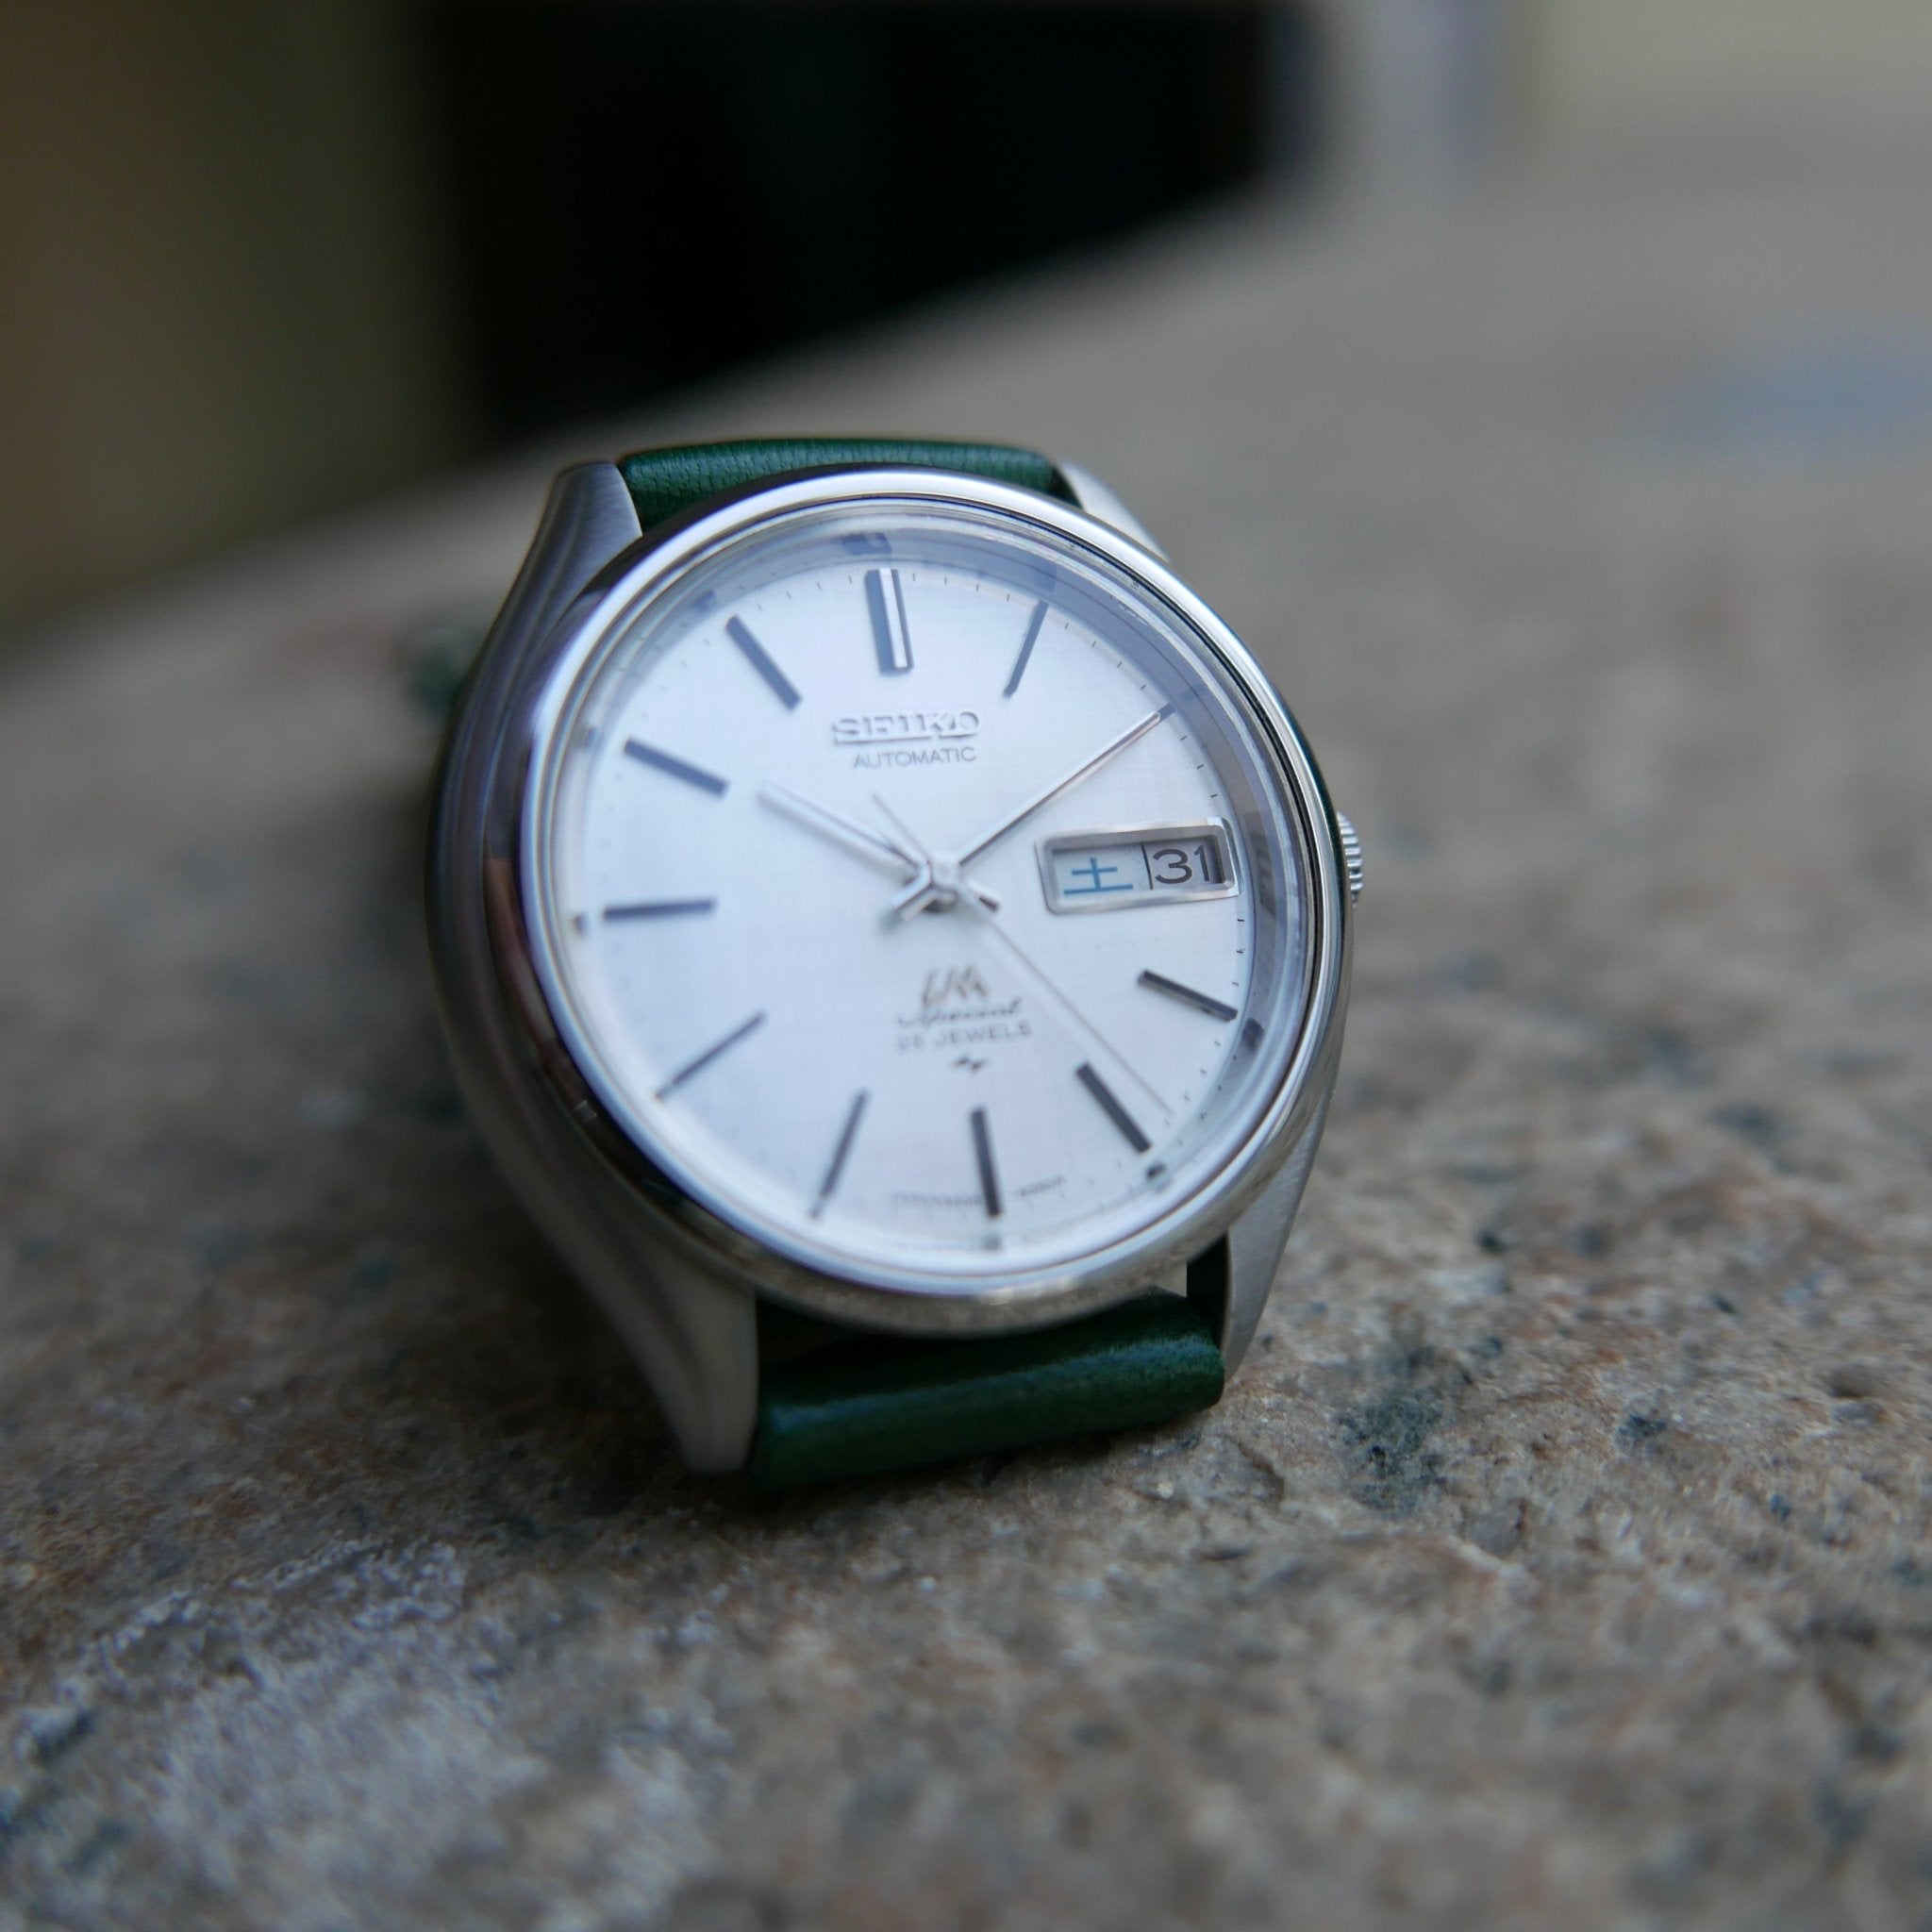 Vintage Watch | Seiko Lord Matic Special 5206 [Mint Condition] - Samurai Vintage Co.